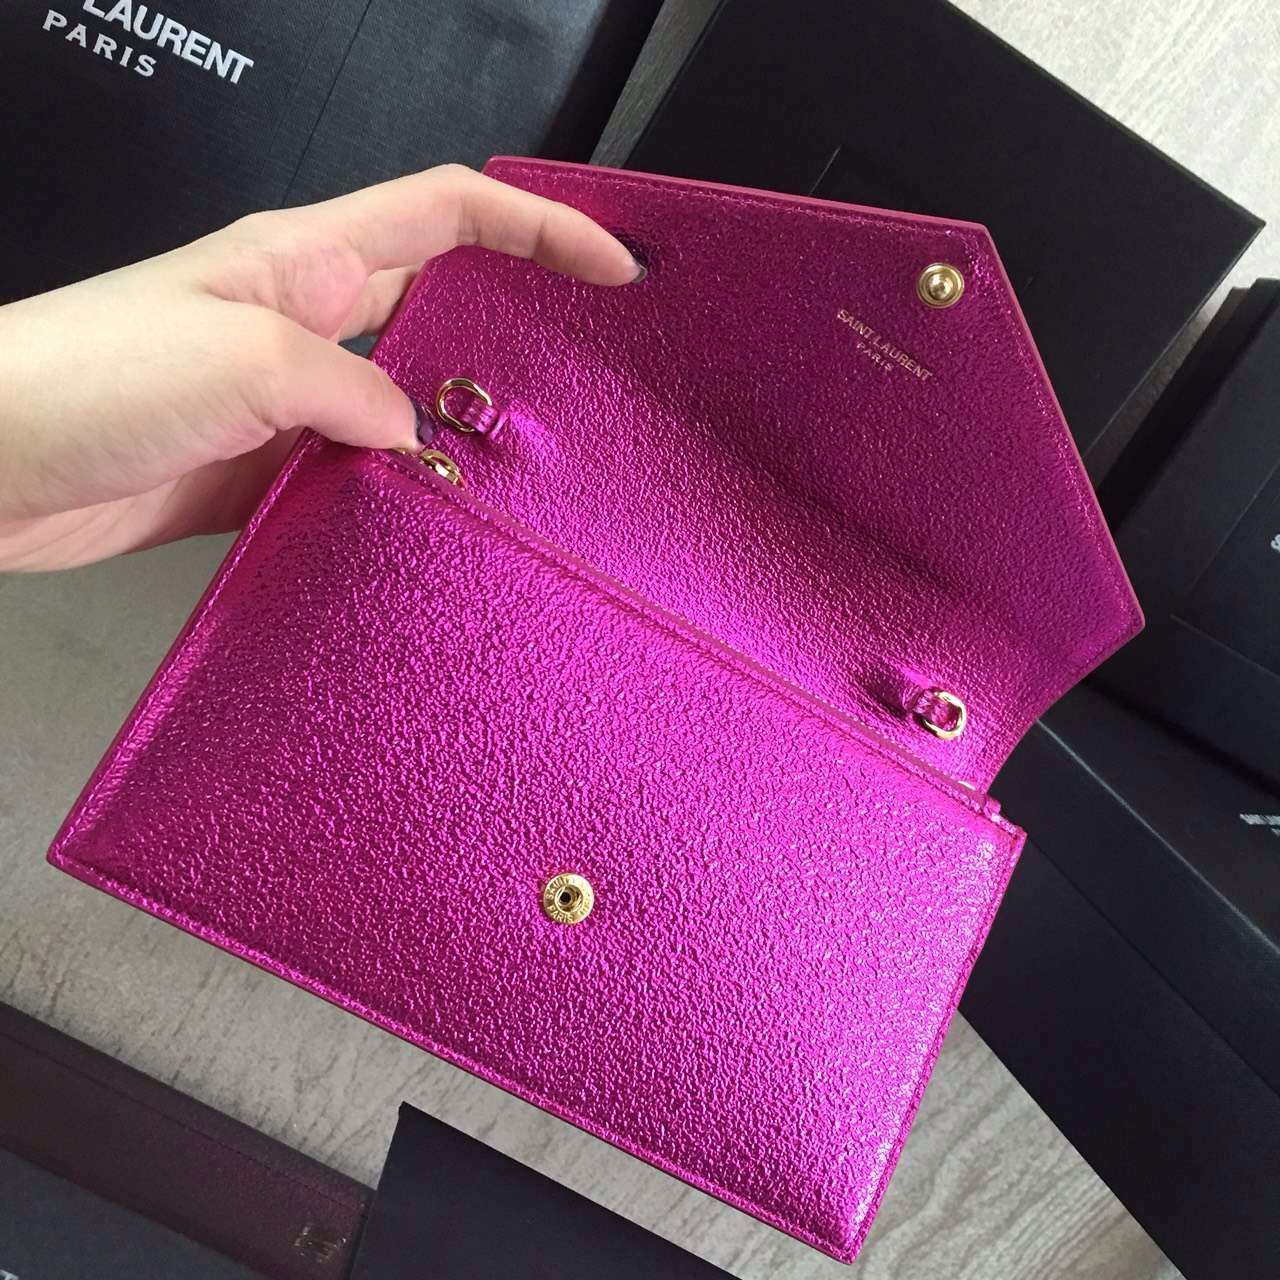 2016 Cheap YSL Out Sale with Free Shipping-Saint Laurent Monogram Envelope Chain Wallet in Rose Grain Leather - Click Image to Close